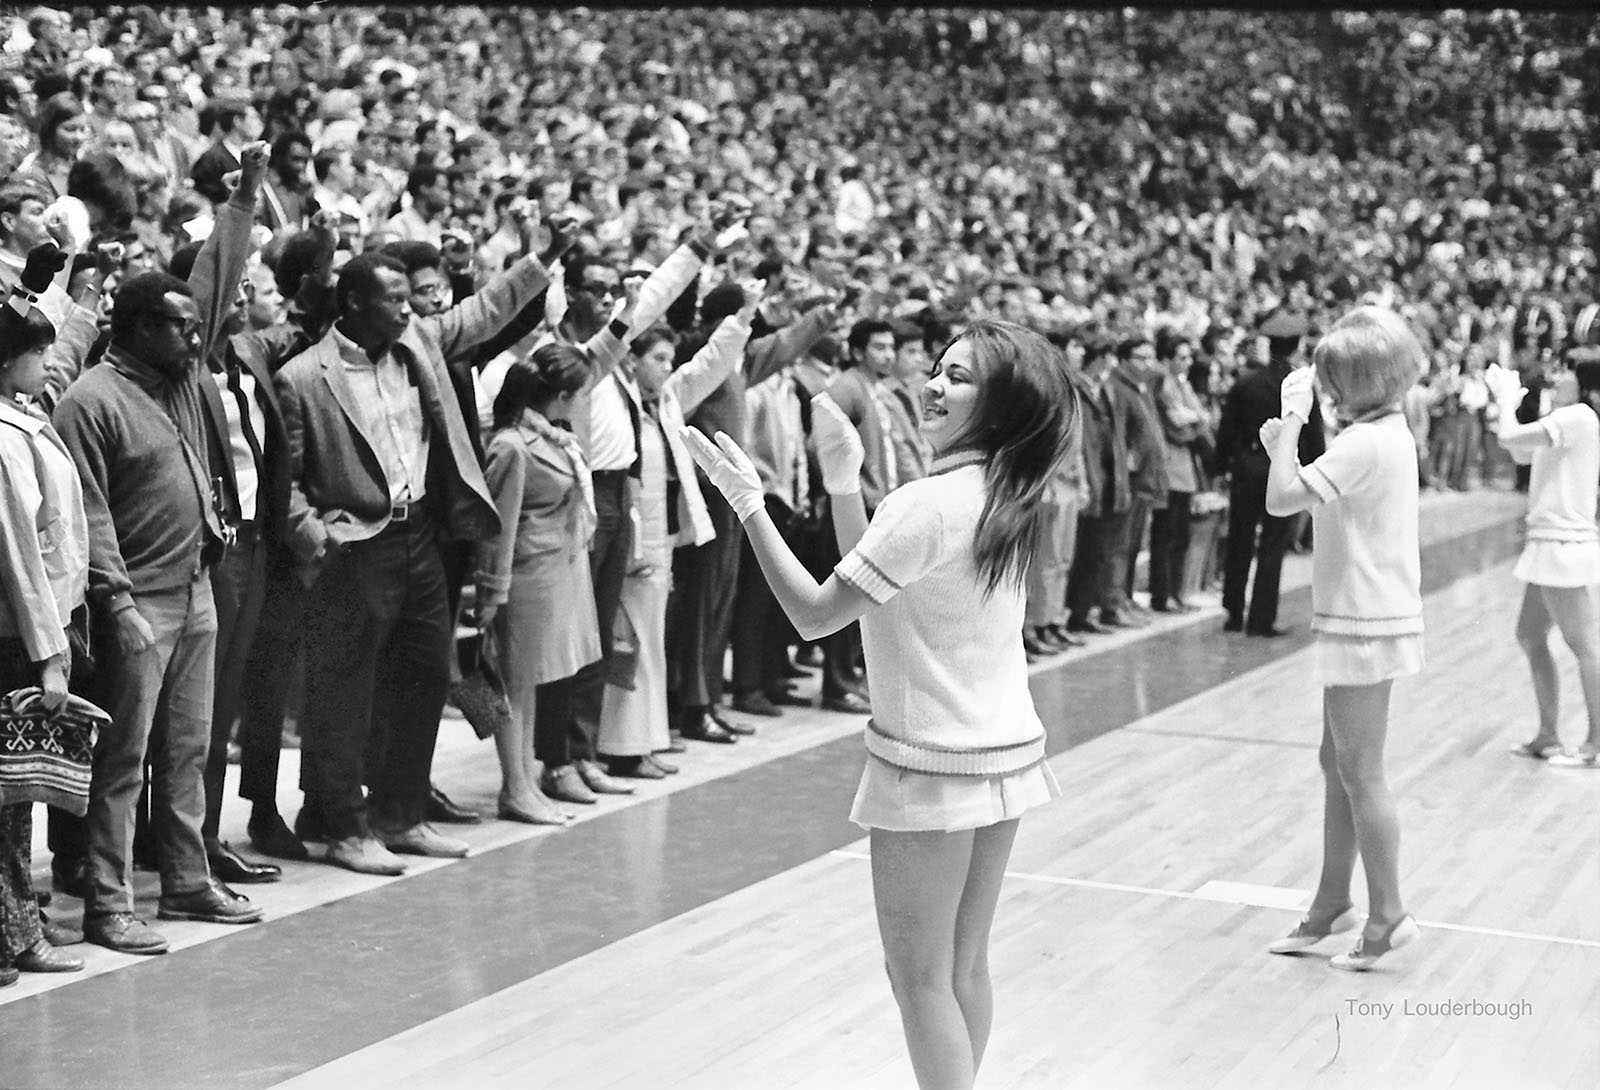 Anthony Louderbough, University of New Mexico Students Give Black Power Salute at a Lobos Basketball Game